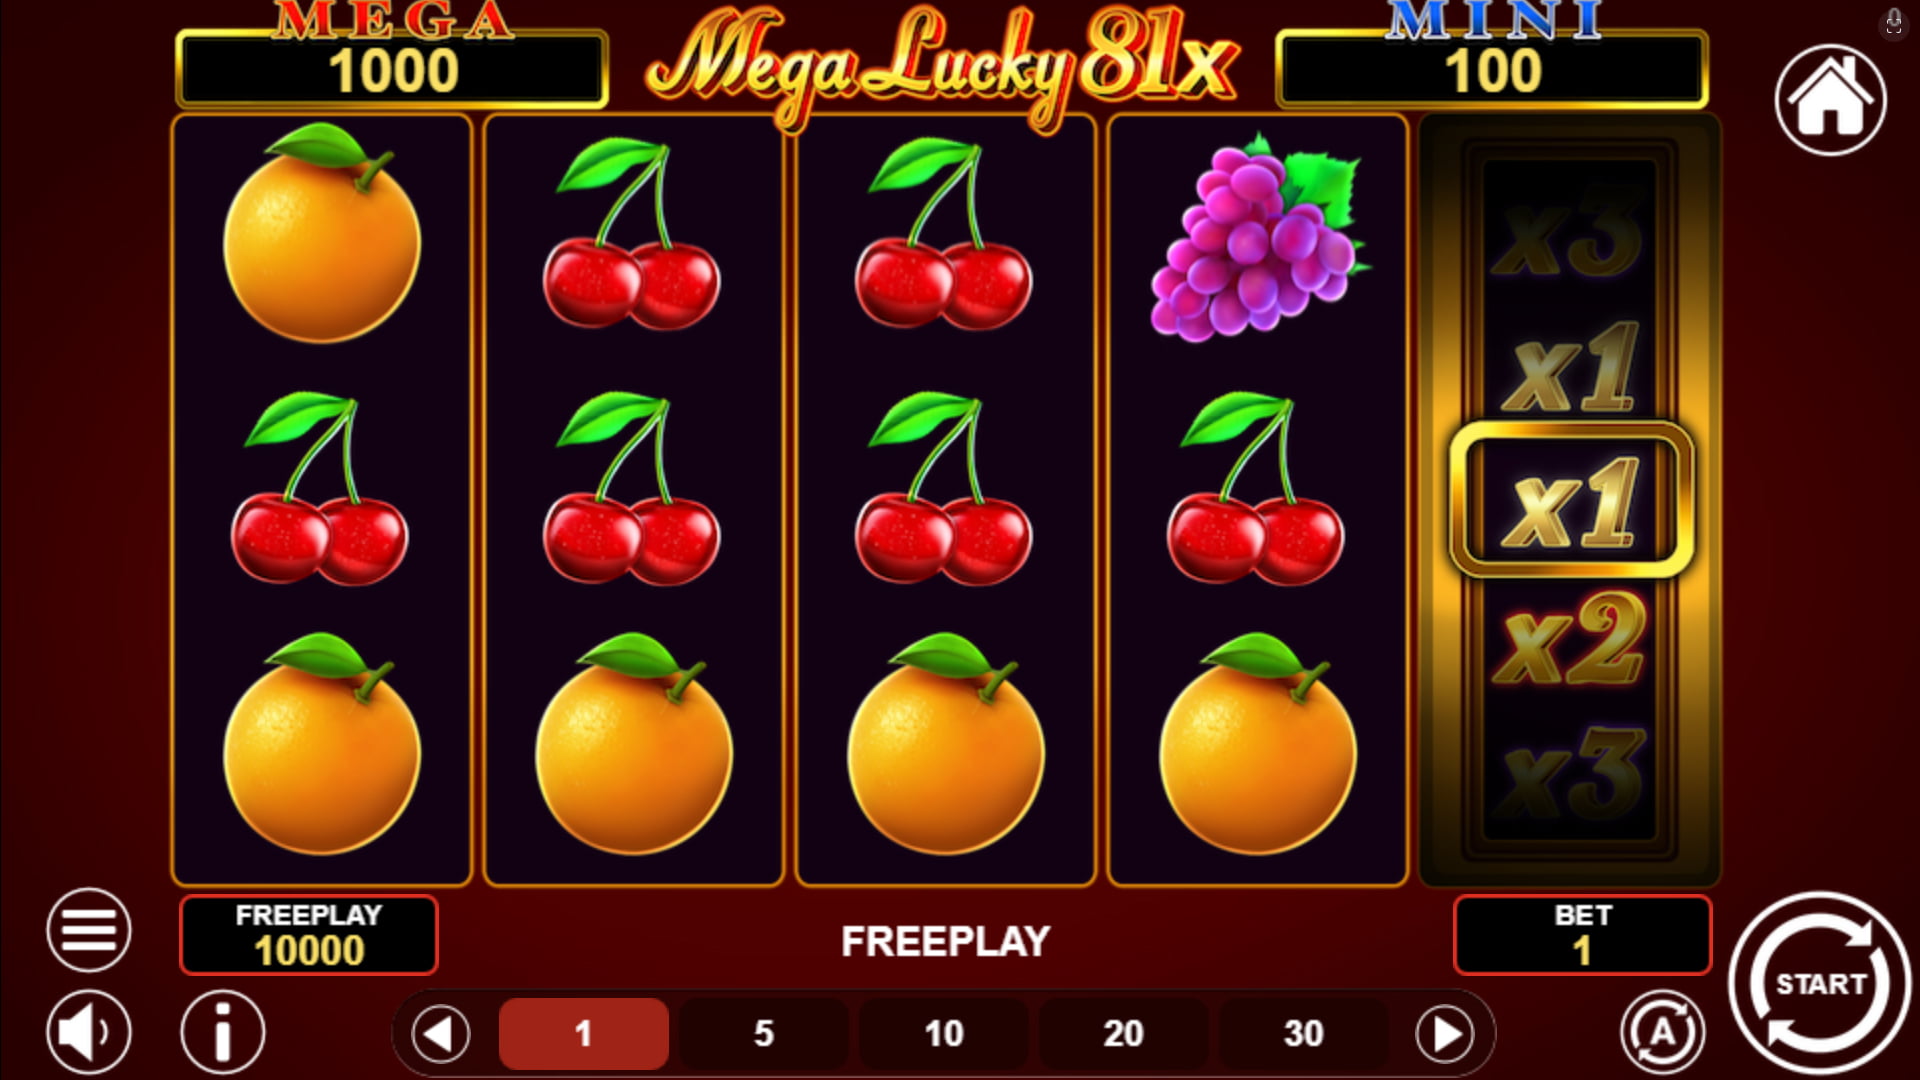 Mega Lucky 81x By 1spin4win